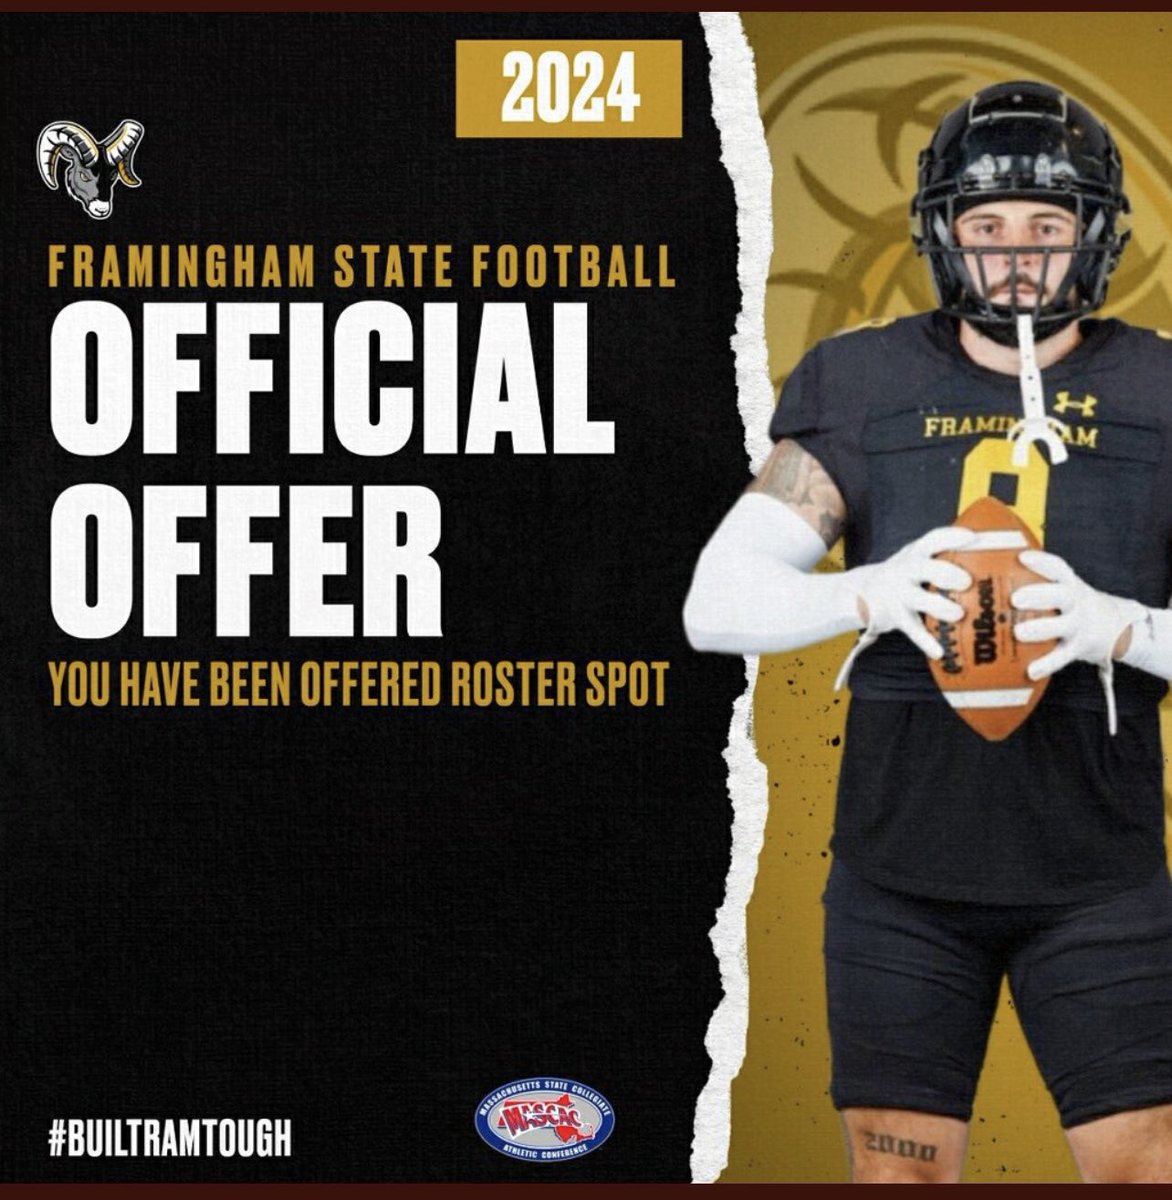 After a great conversation with @CoachDice561 I am extremely grateful to receive an official offer with @fsuramsfootball . #AGTG #BuiltRamTough